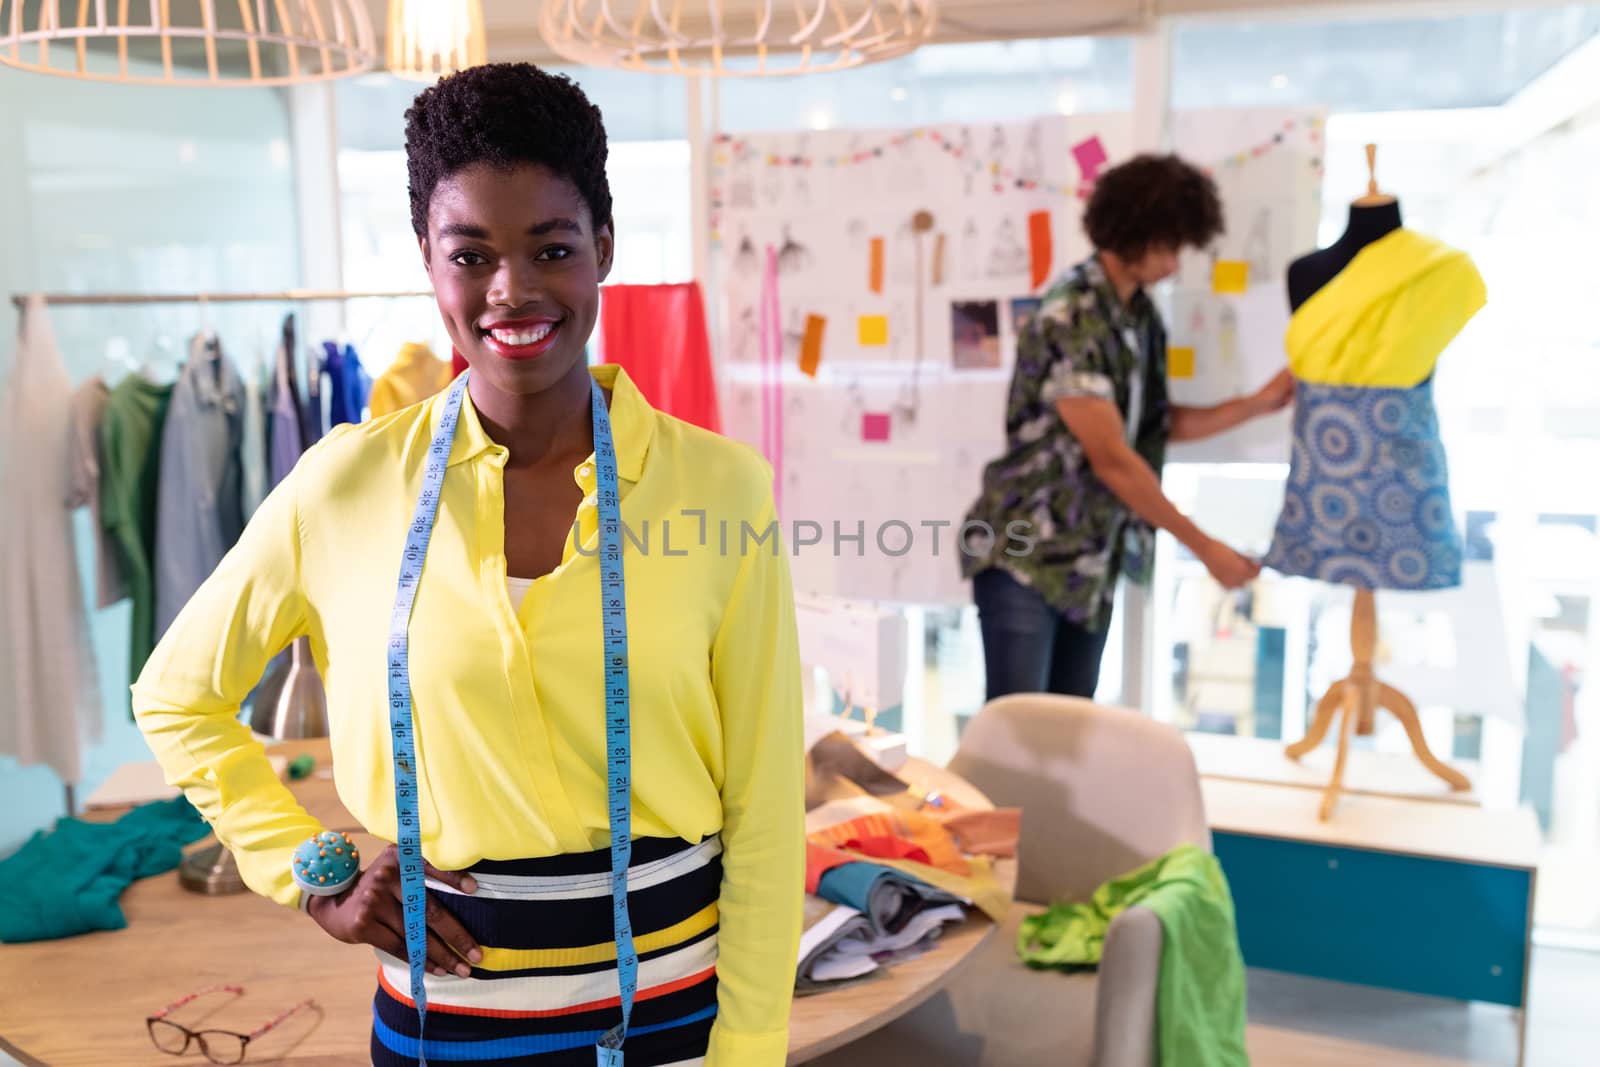 Front view of pretty young African american female fashion designer standing with hand on hip in design studio. Mixed race man working in the background. This is a casual creative start-up business office for a diverse team